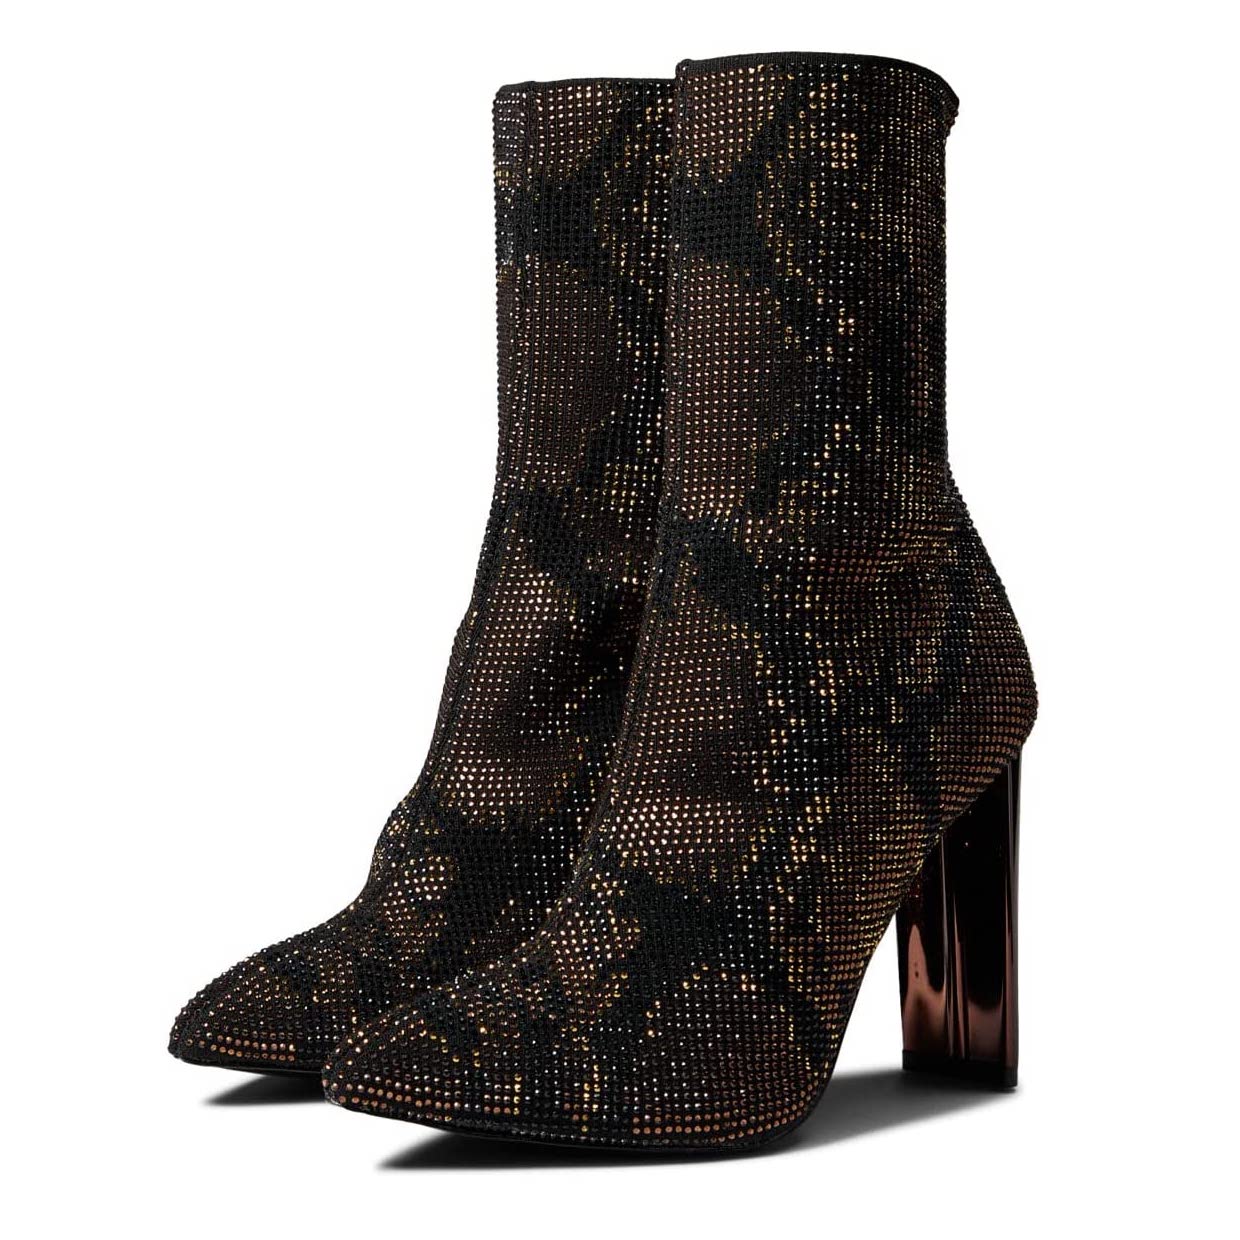 ALDO Shoes | Deludith Brown Embellished Booties | Style